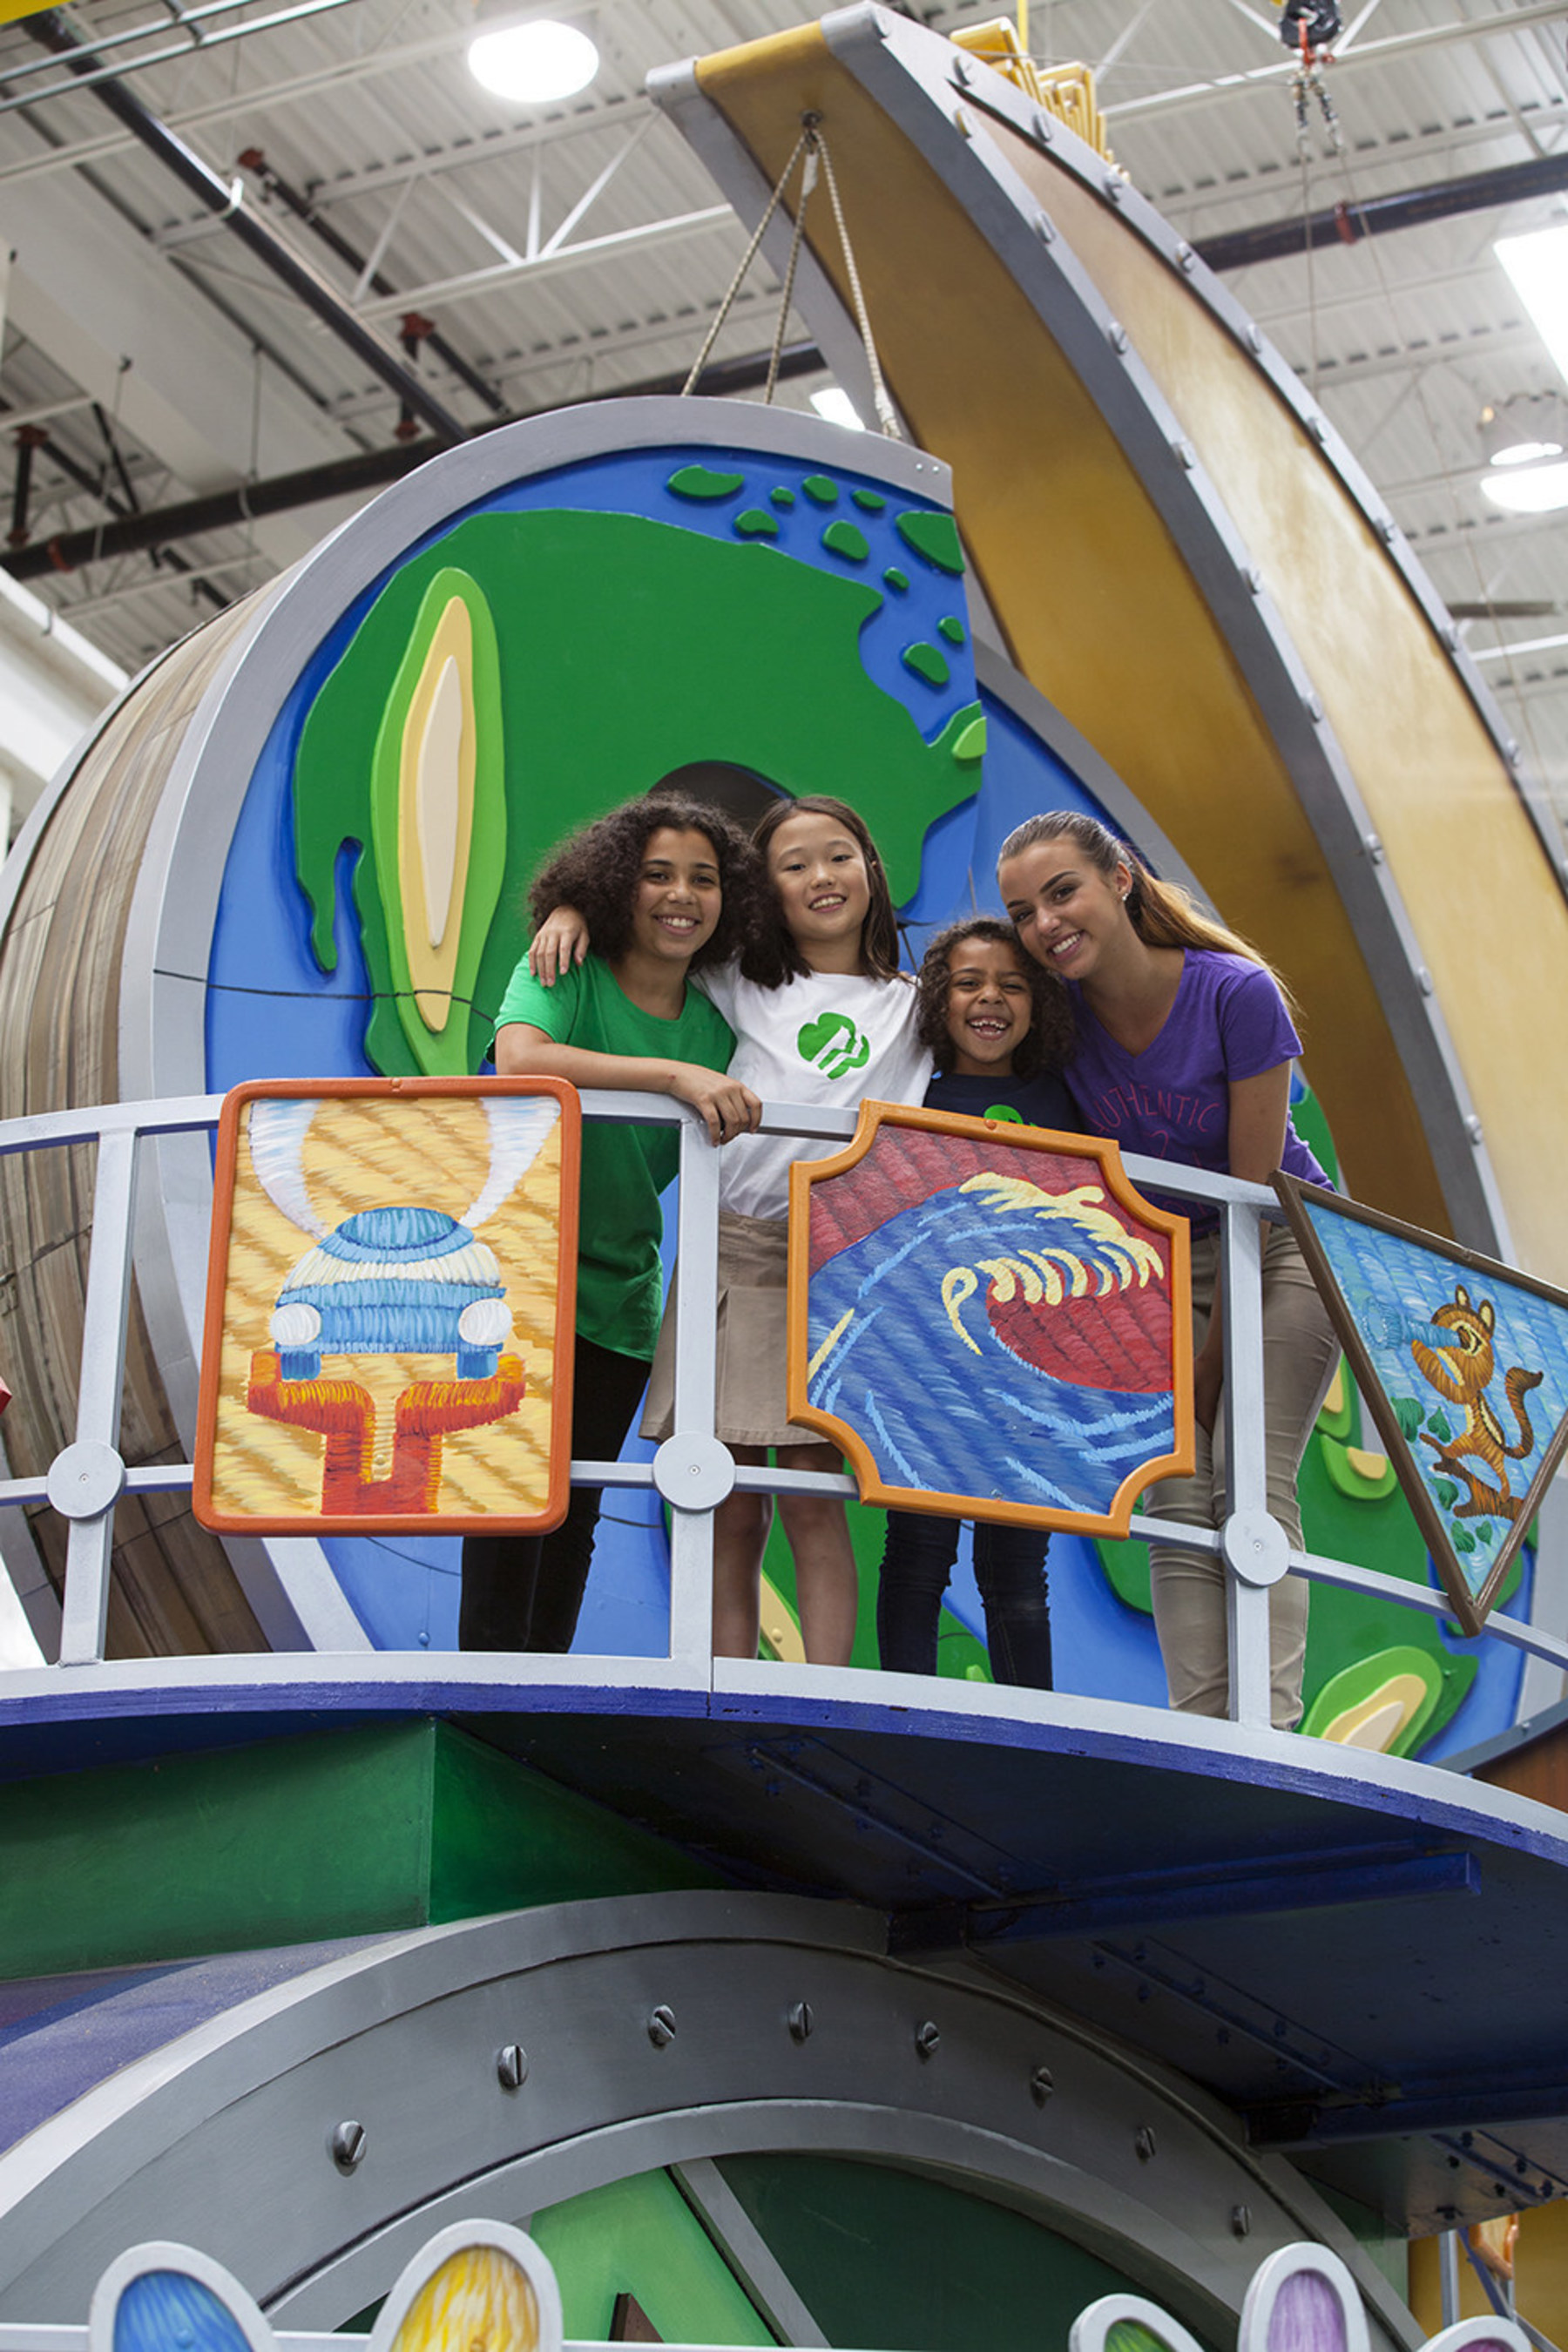 In addition to the giant 3-D puzzle pieces of the globe, the float features two dozen Girl Scout badges, representing everything from STEM and the outdoors to financial literacy and entrepreneurship, a friendship circle, and a Gold Award symbol that marks this year's centennial.